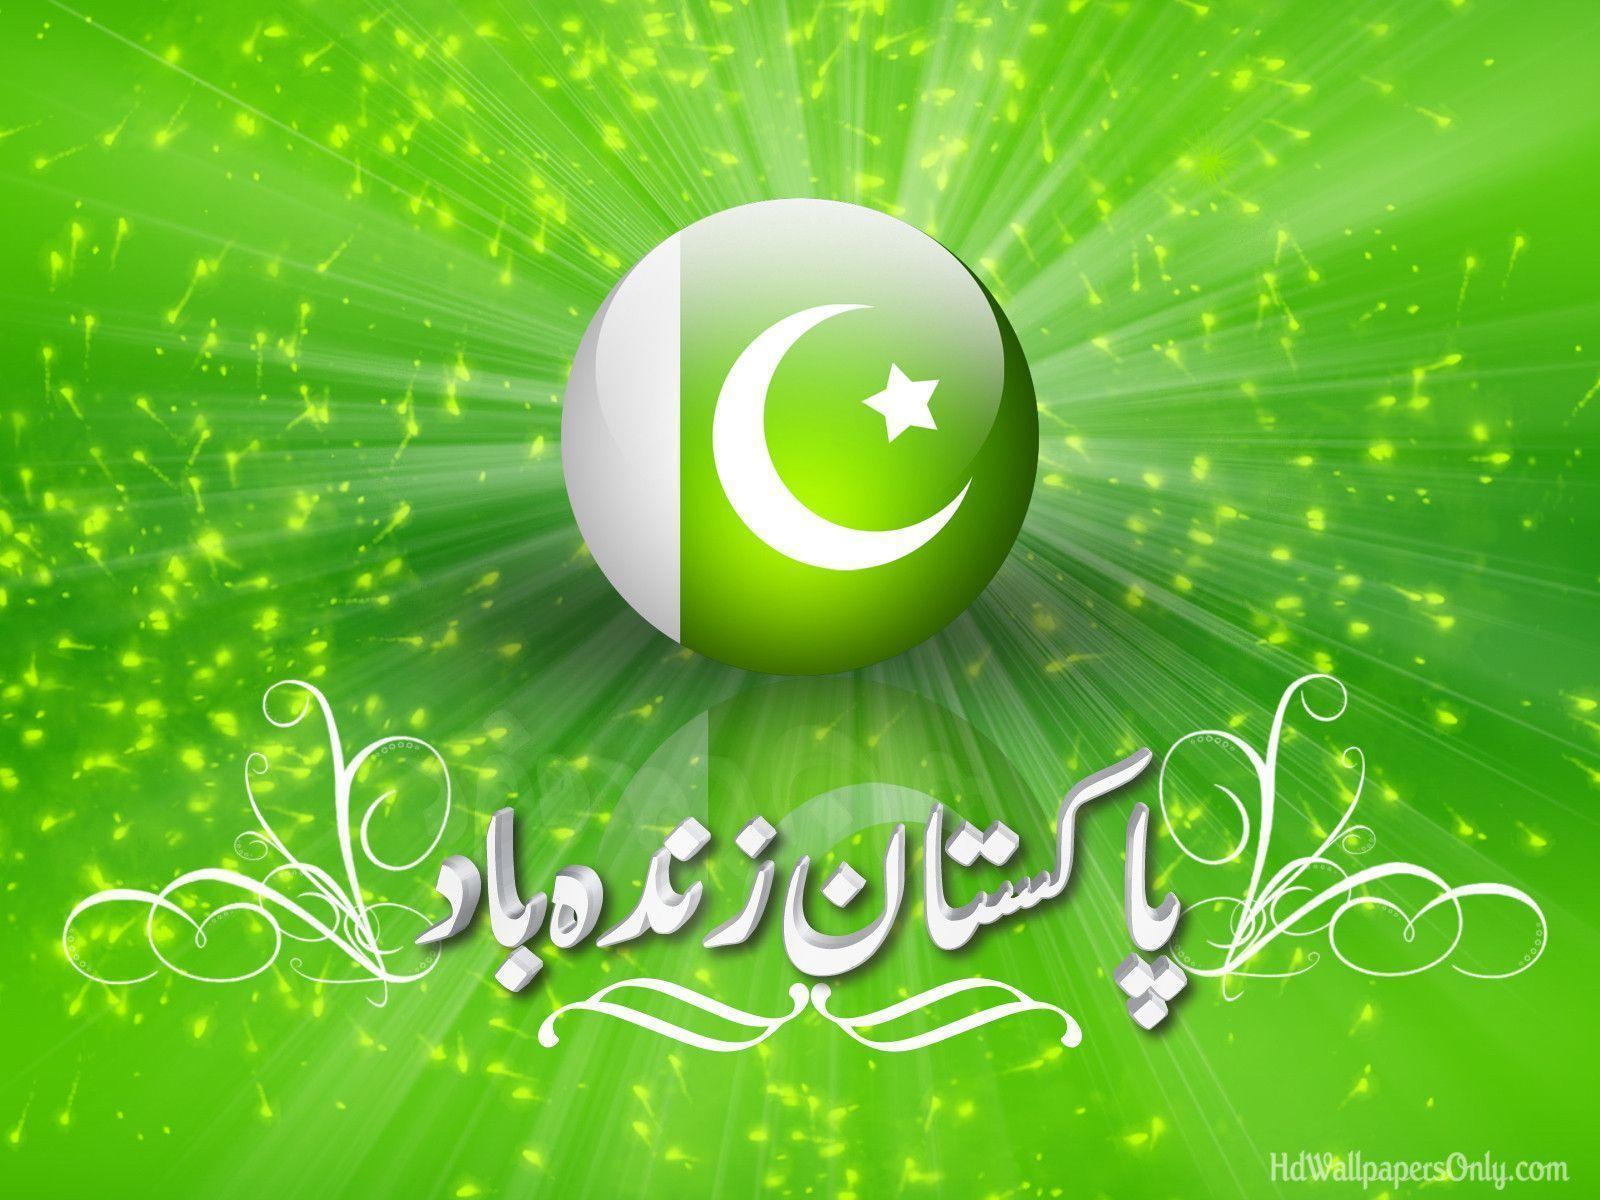 Independence Day of Pakistan 2014 Wallpaper OnlyHD